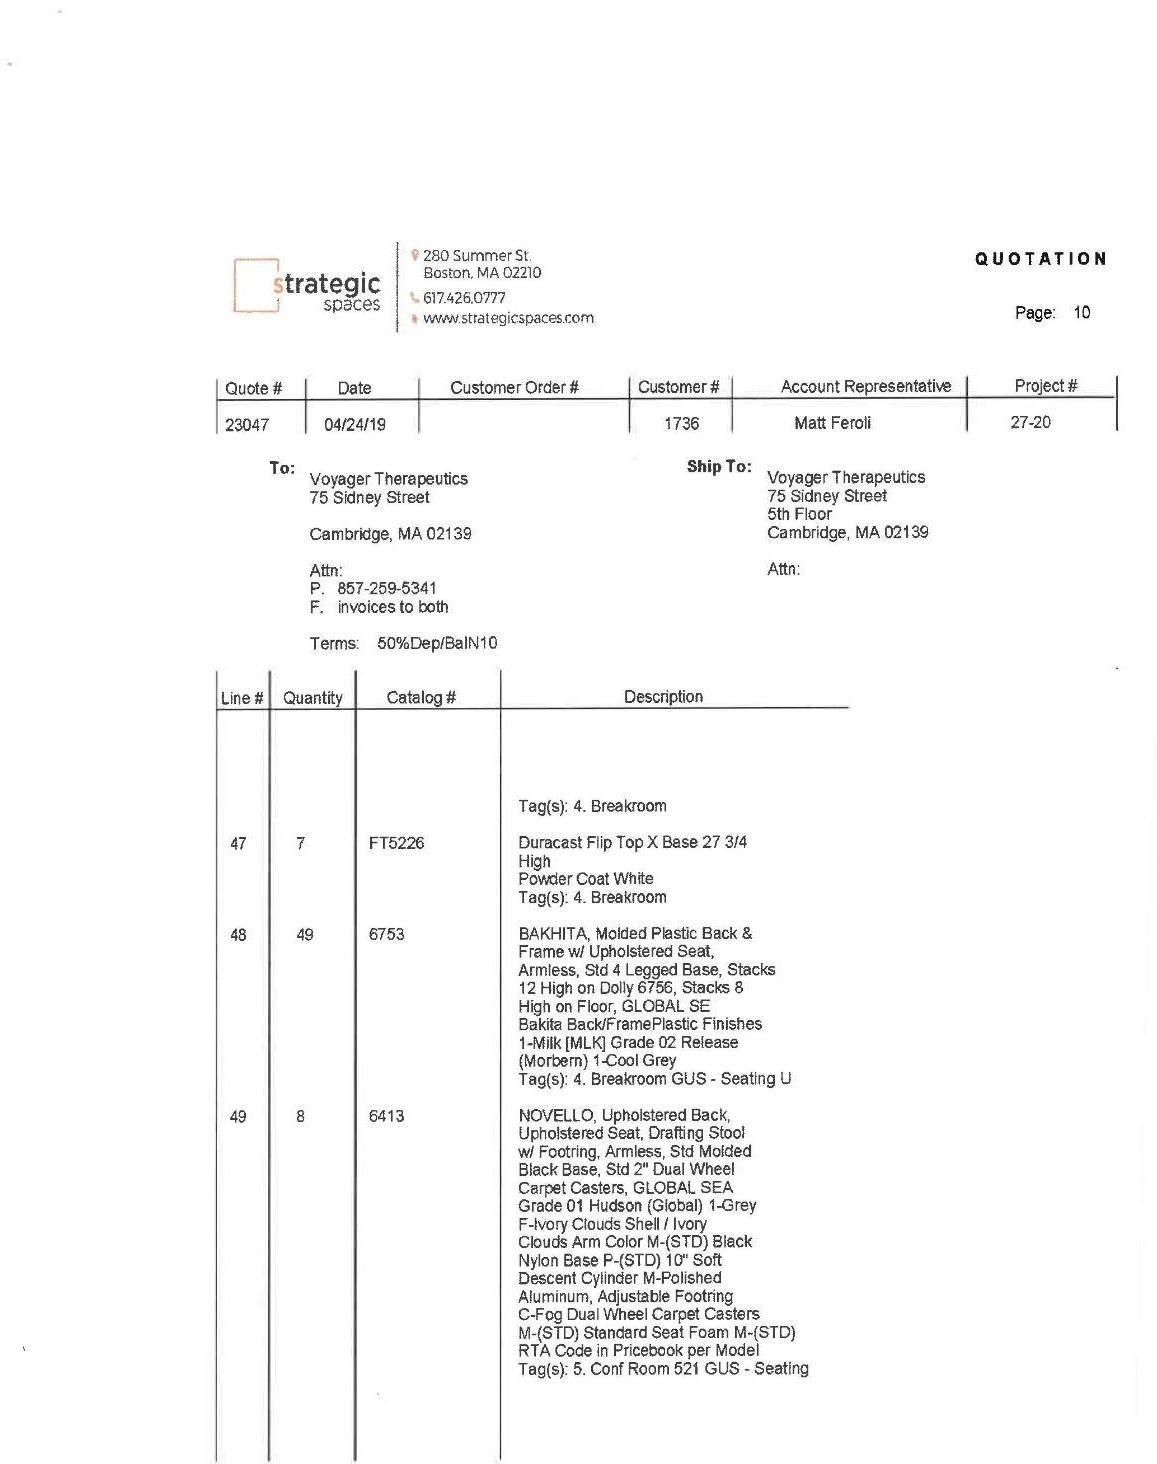 Ex C to Voyager BioNTech Sublease Agreement_Page_10